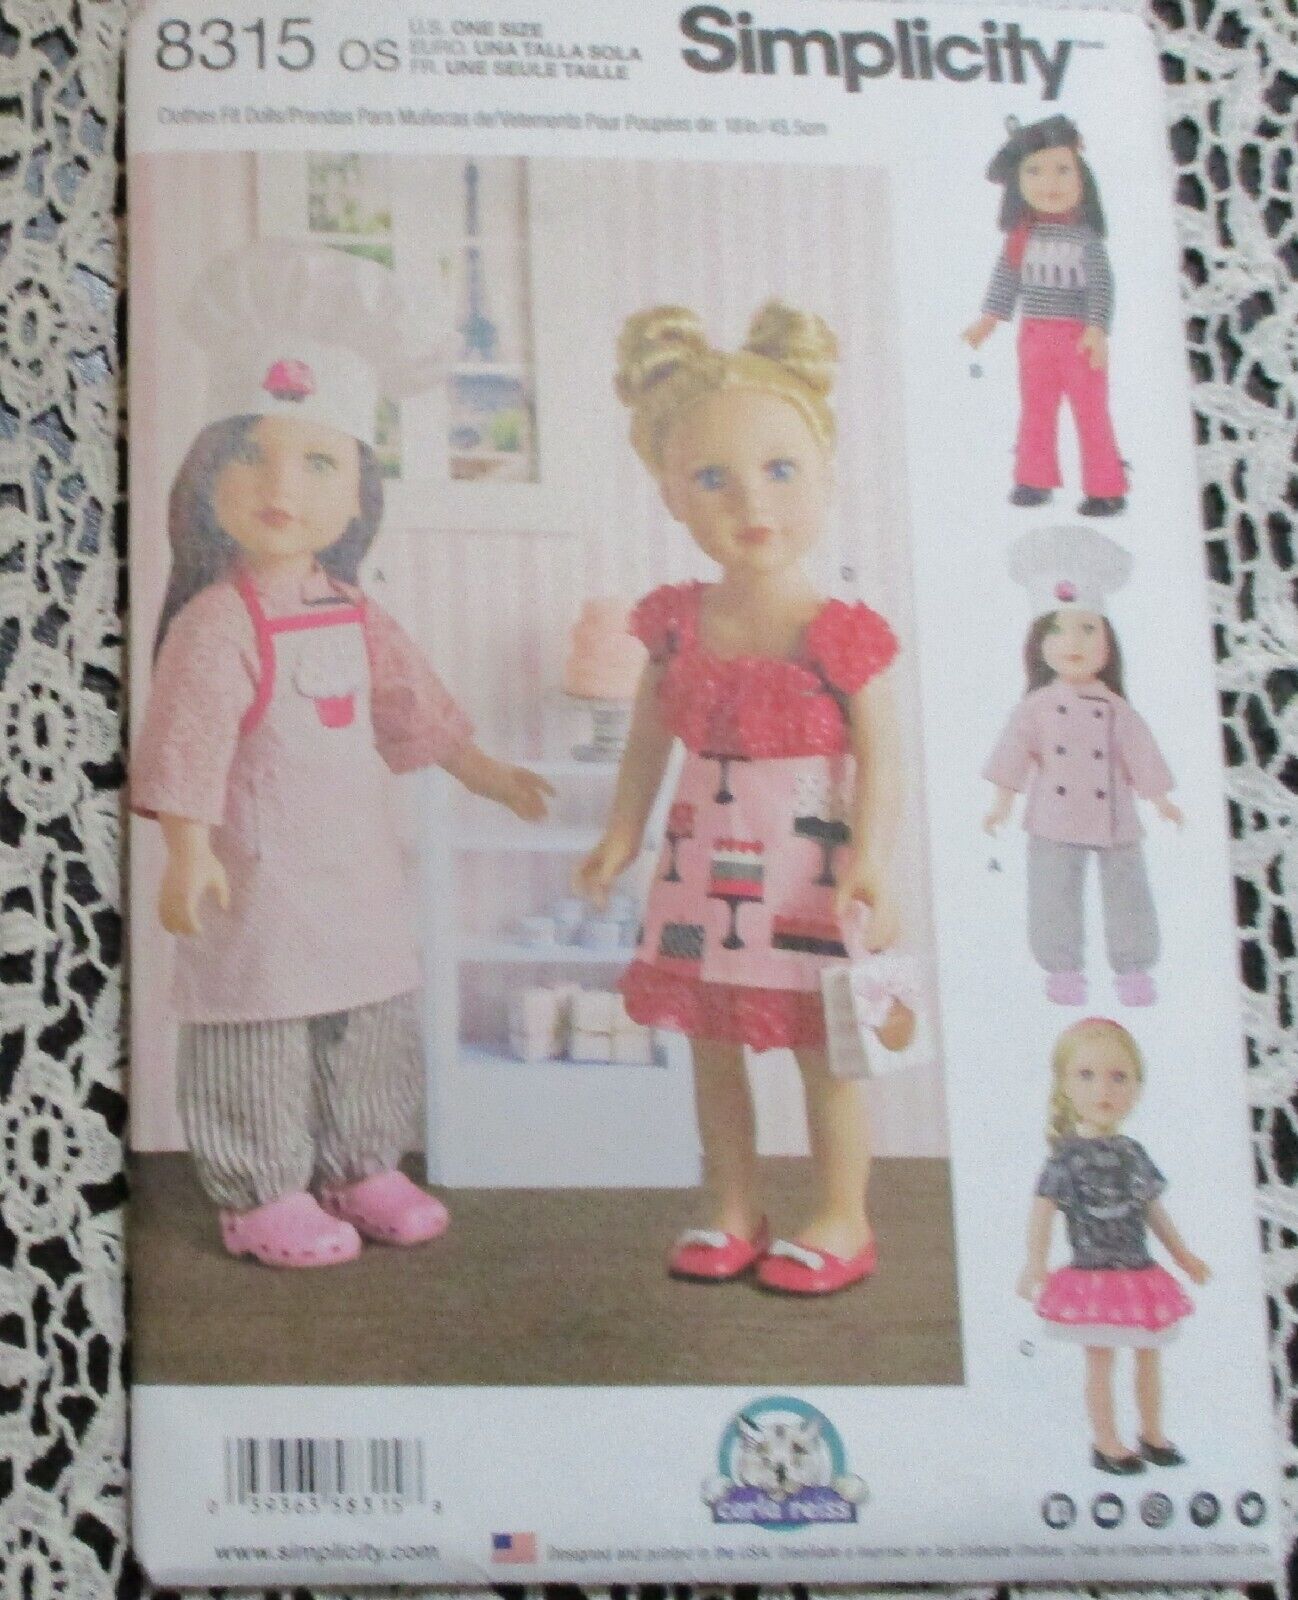 Simplicity 8315 Doll Clothes 18" chef apron dress Sewing Pattern UNCUT - $8.90